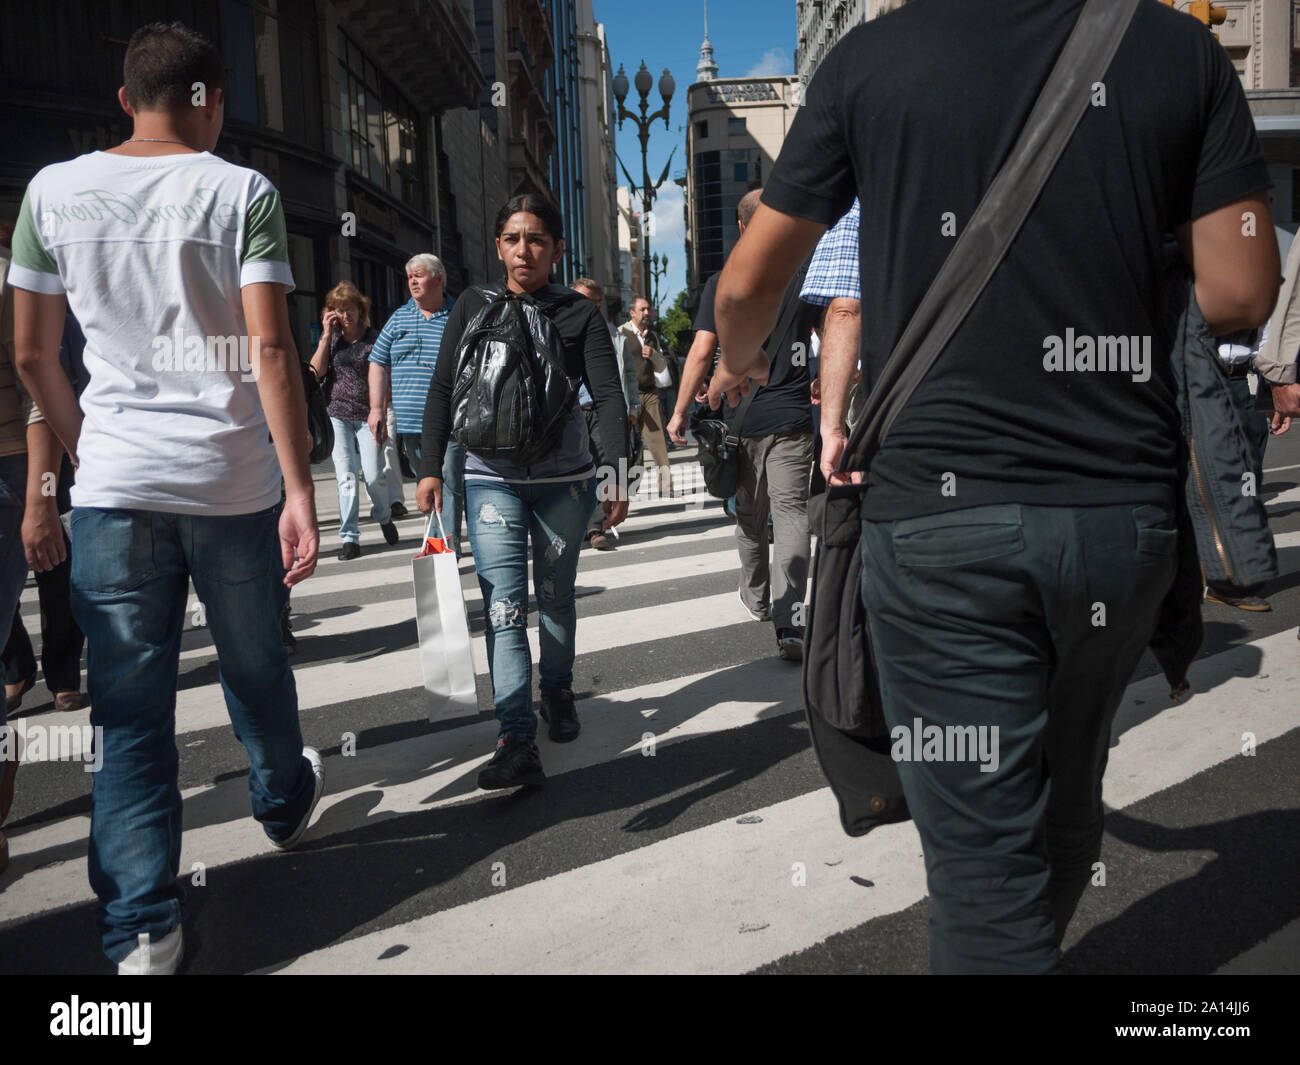 Buenos Aires, Argentina - March 21 2013: Pedestrians on the sreets of Buenos Aires city. This photo shows the downtown arround Plaza de Mayo. Stock Photo